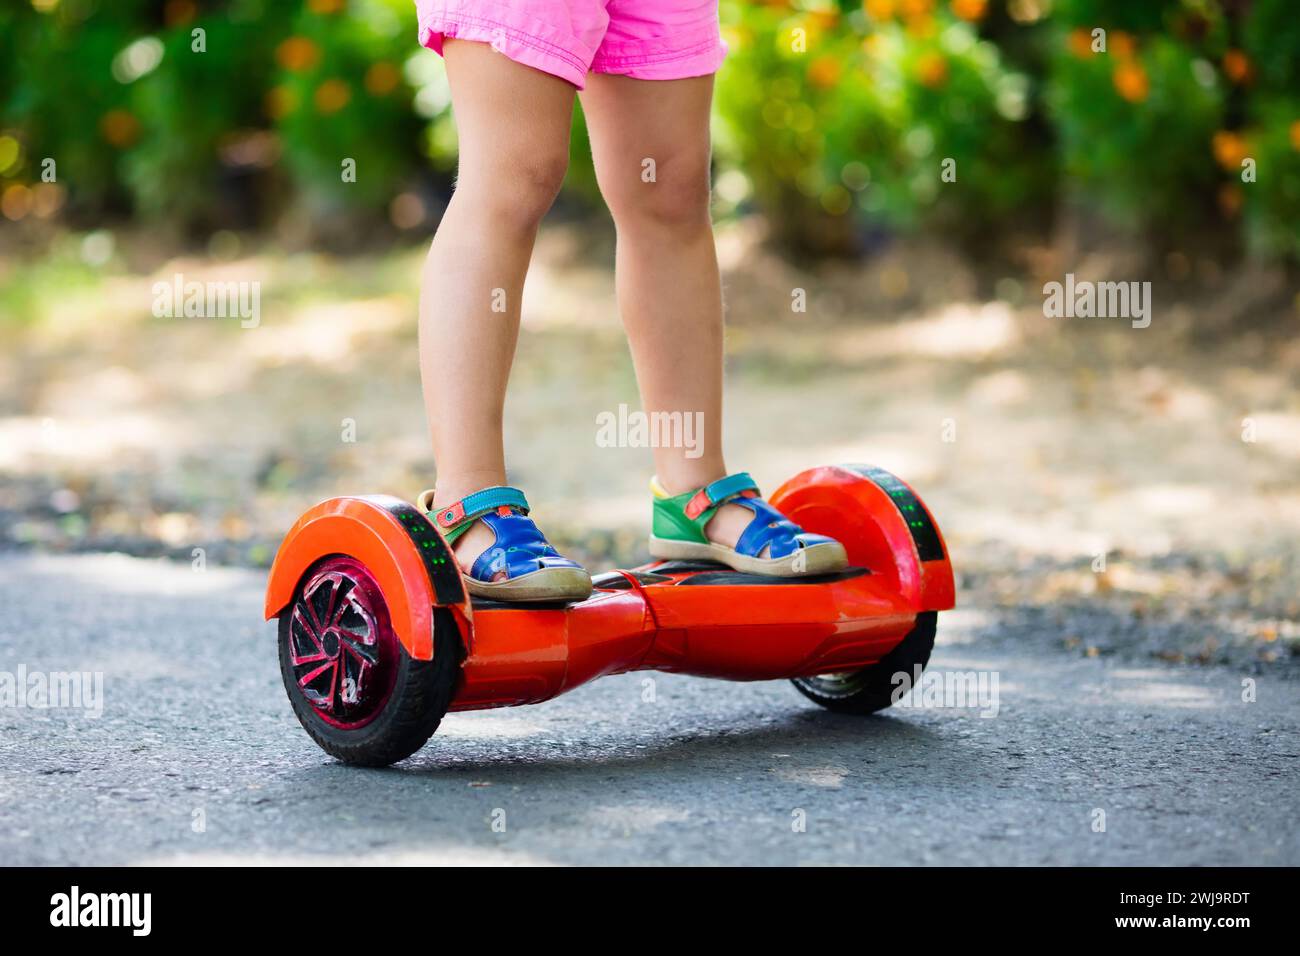 Child on hover board. Kids riding scooter in summer park. Balance board for children. Electric self balancing scooter on city street. Stock Photo